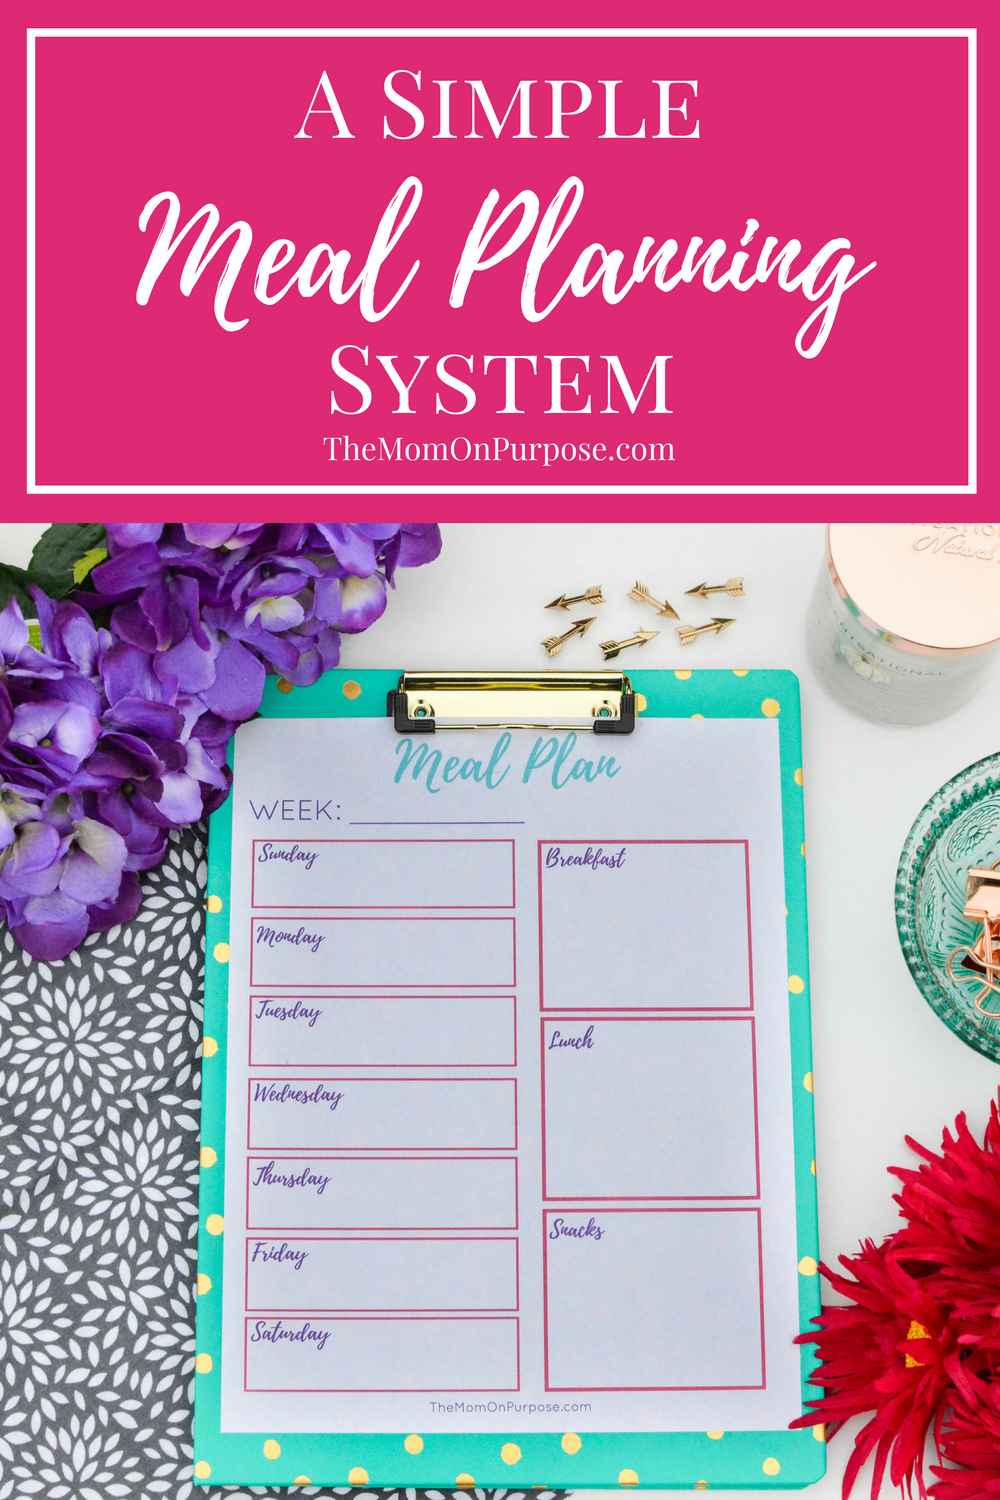 Meal planning and food Archives - Simple Essentials